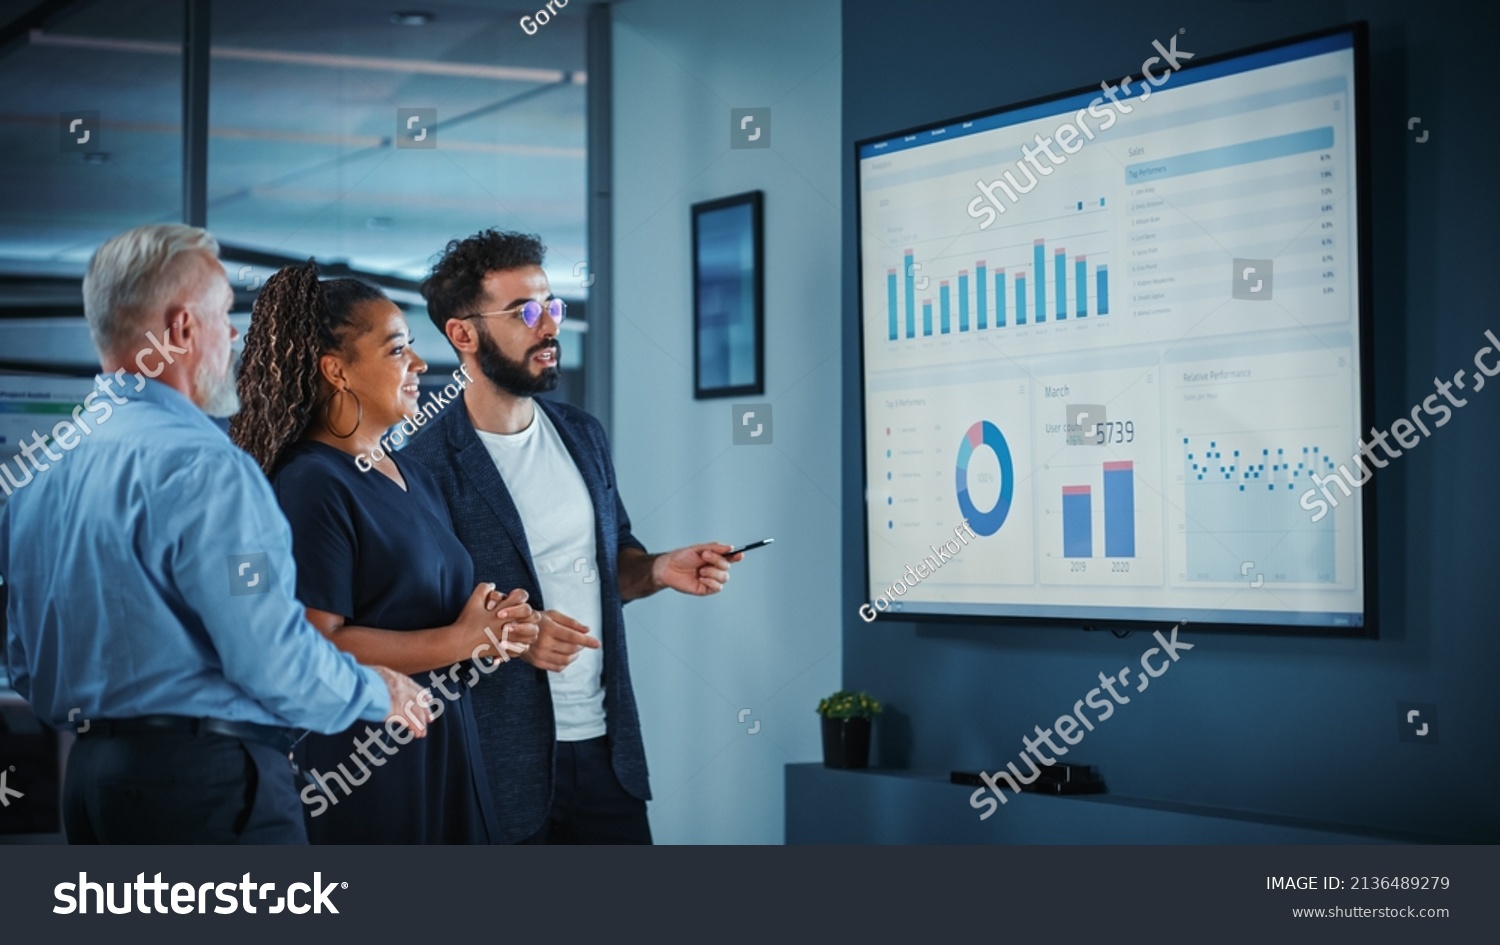 Company Operations Manager Holds Meeting Presentation. Diverse Team Uses TV Screen with Growth Analysis, Charts, Statistics and Data. People Work in Business Office. #2136489279